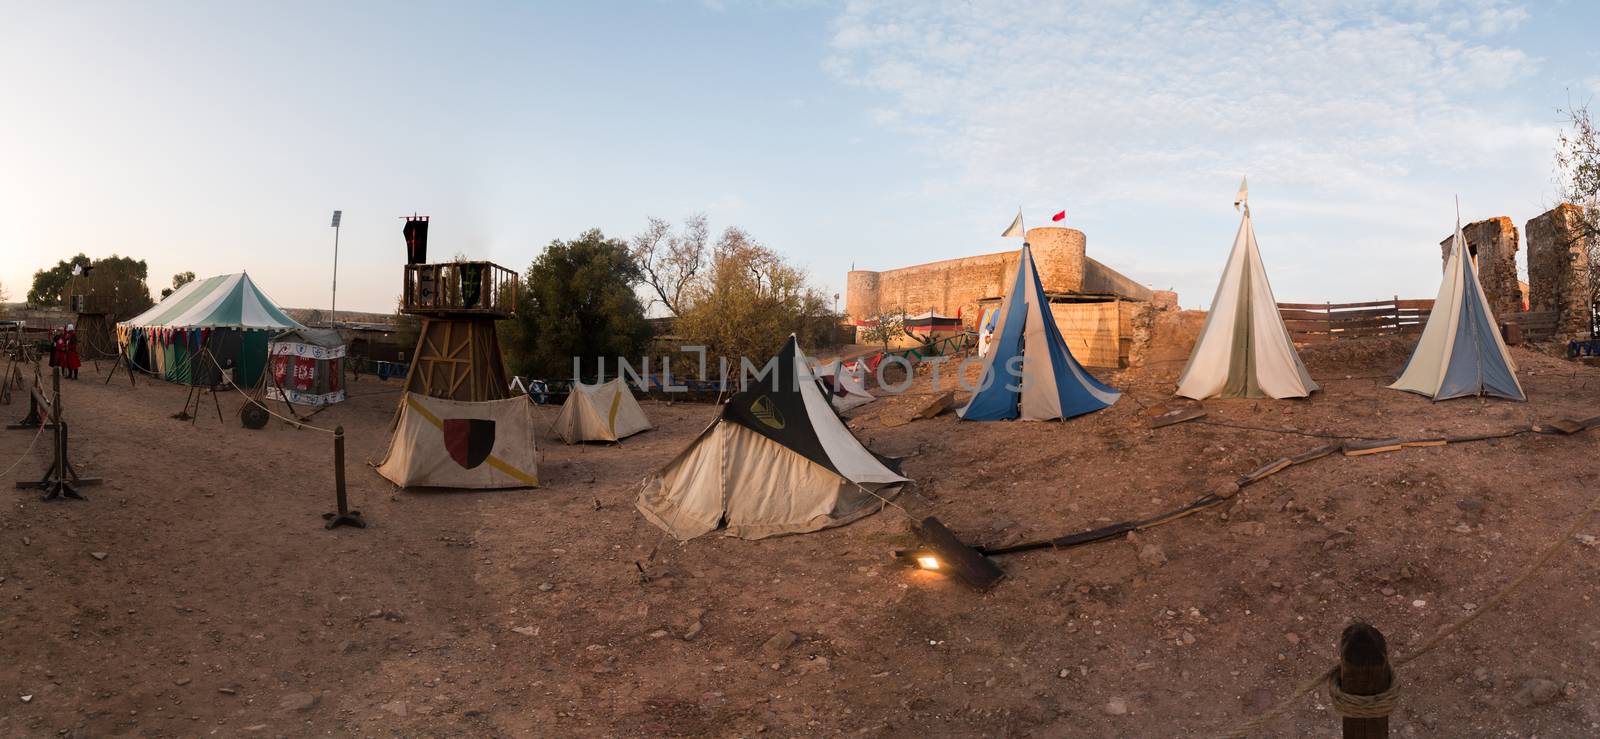 View of a typical medieval camp site with tents.